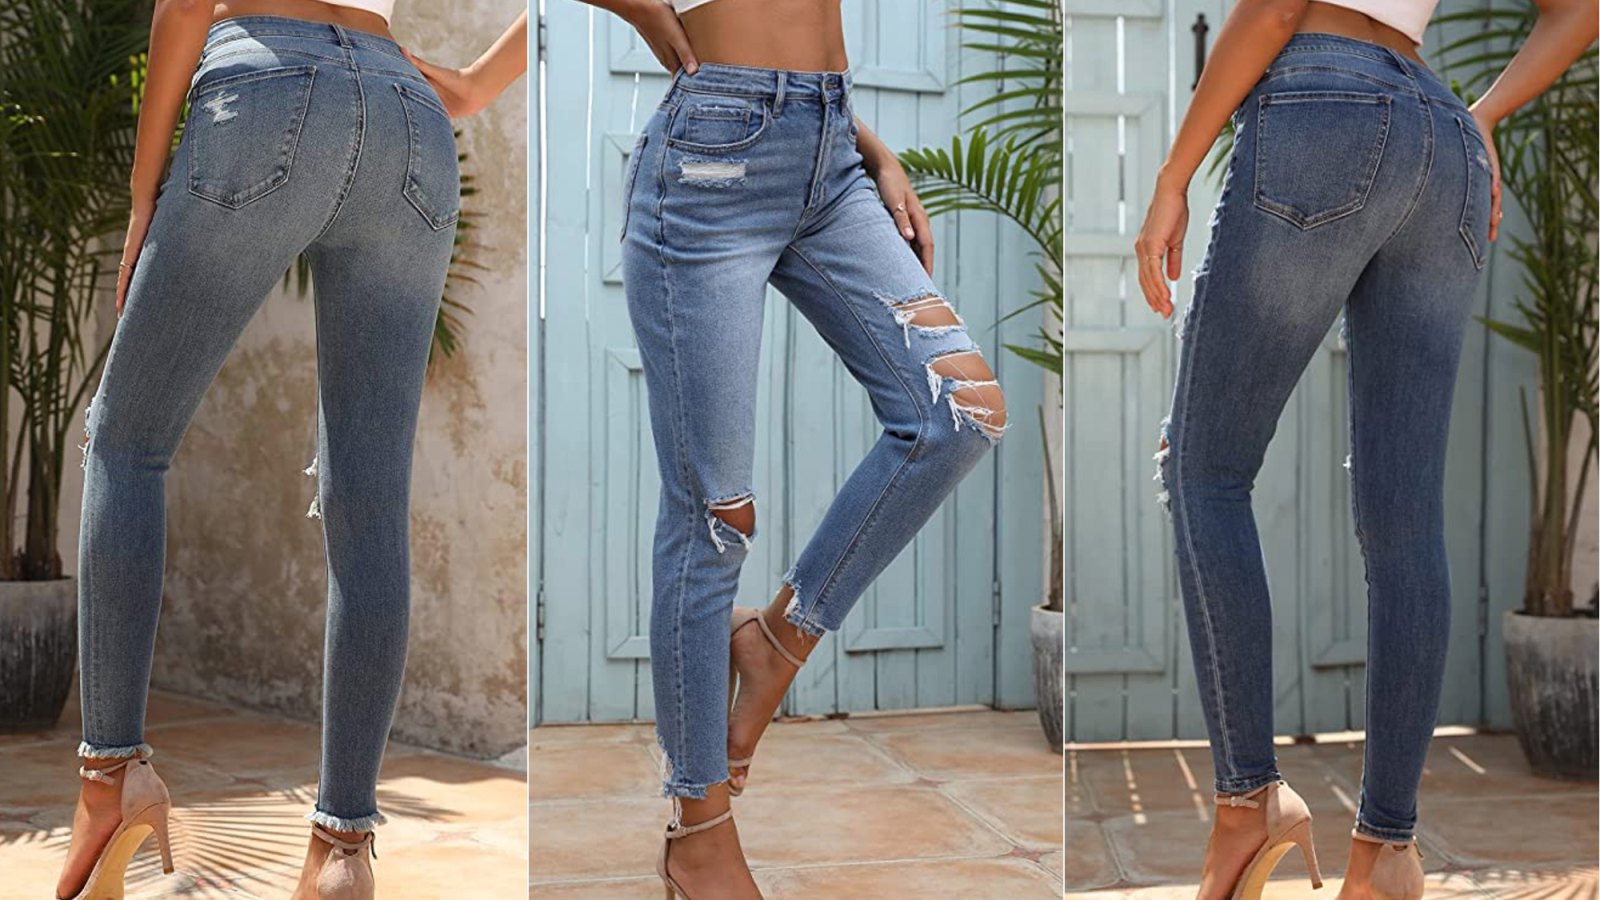 https://www.usmagazine.com/wp-content/uploads/2022/05/OFLUCK-Womens-Stretch-Ripped-High-Waisted-Jeans.jpg?w=1600&h=900&crop=1&quality=86&strip=all